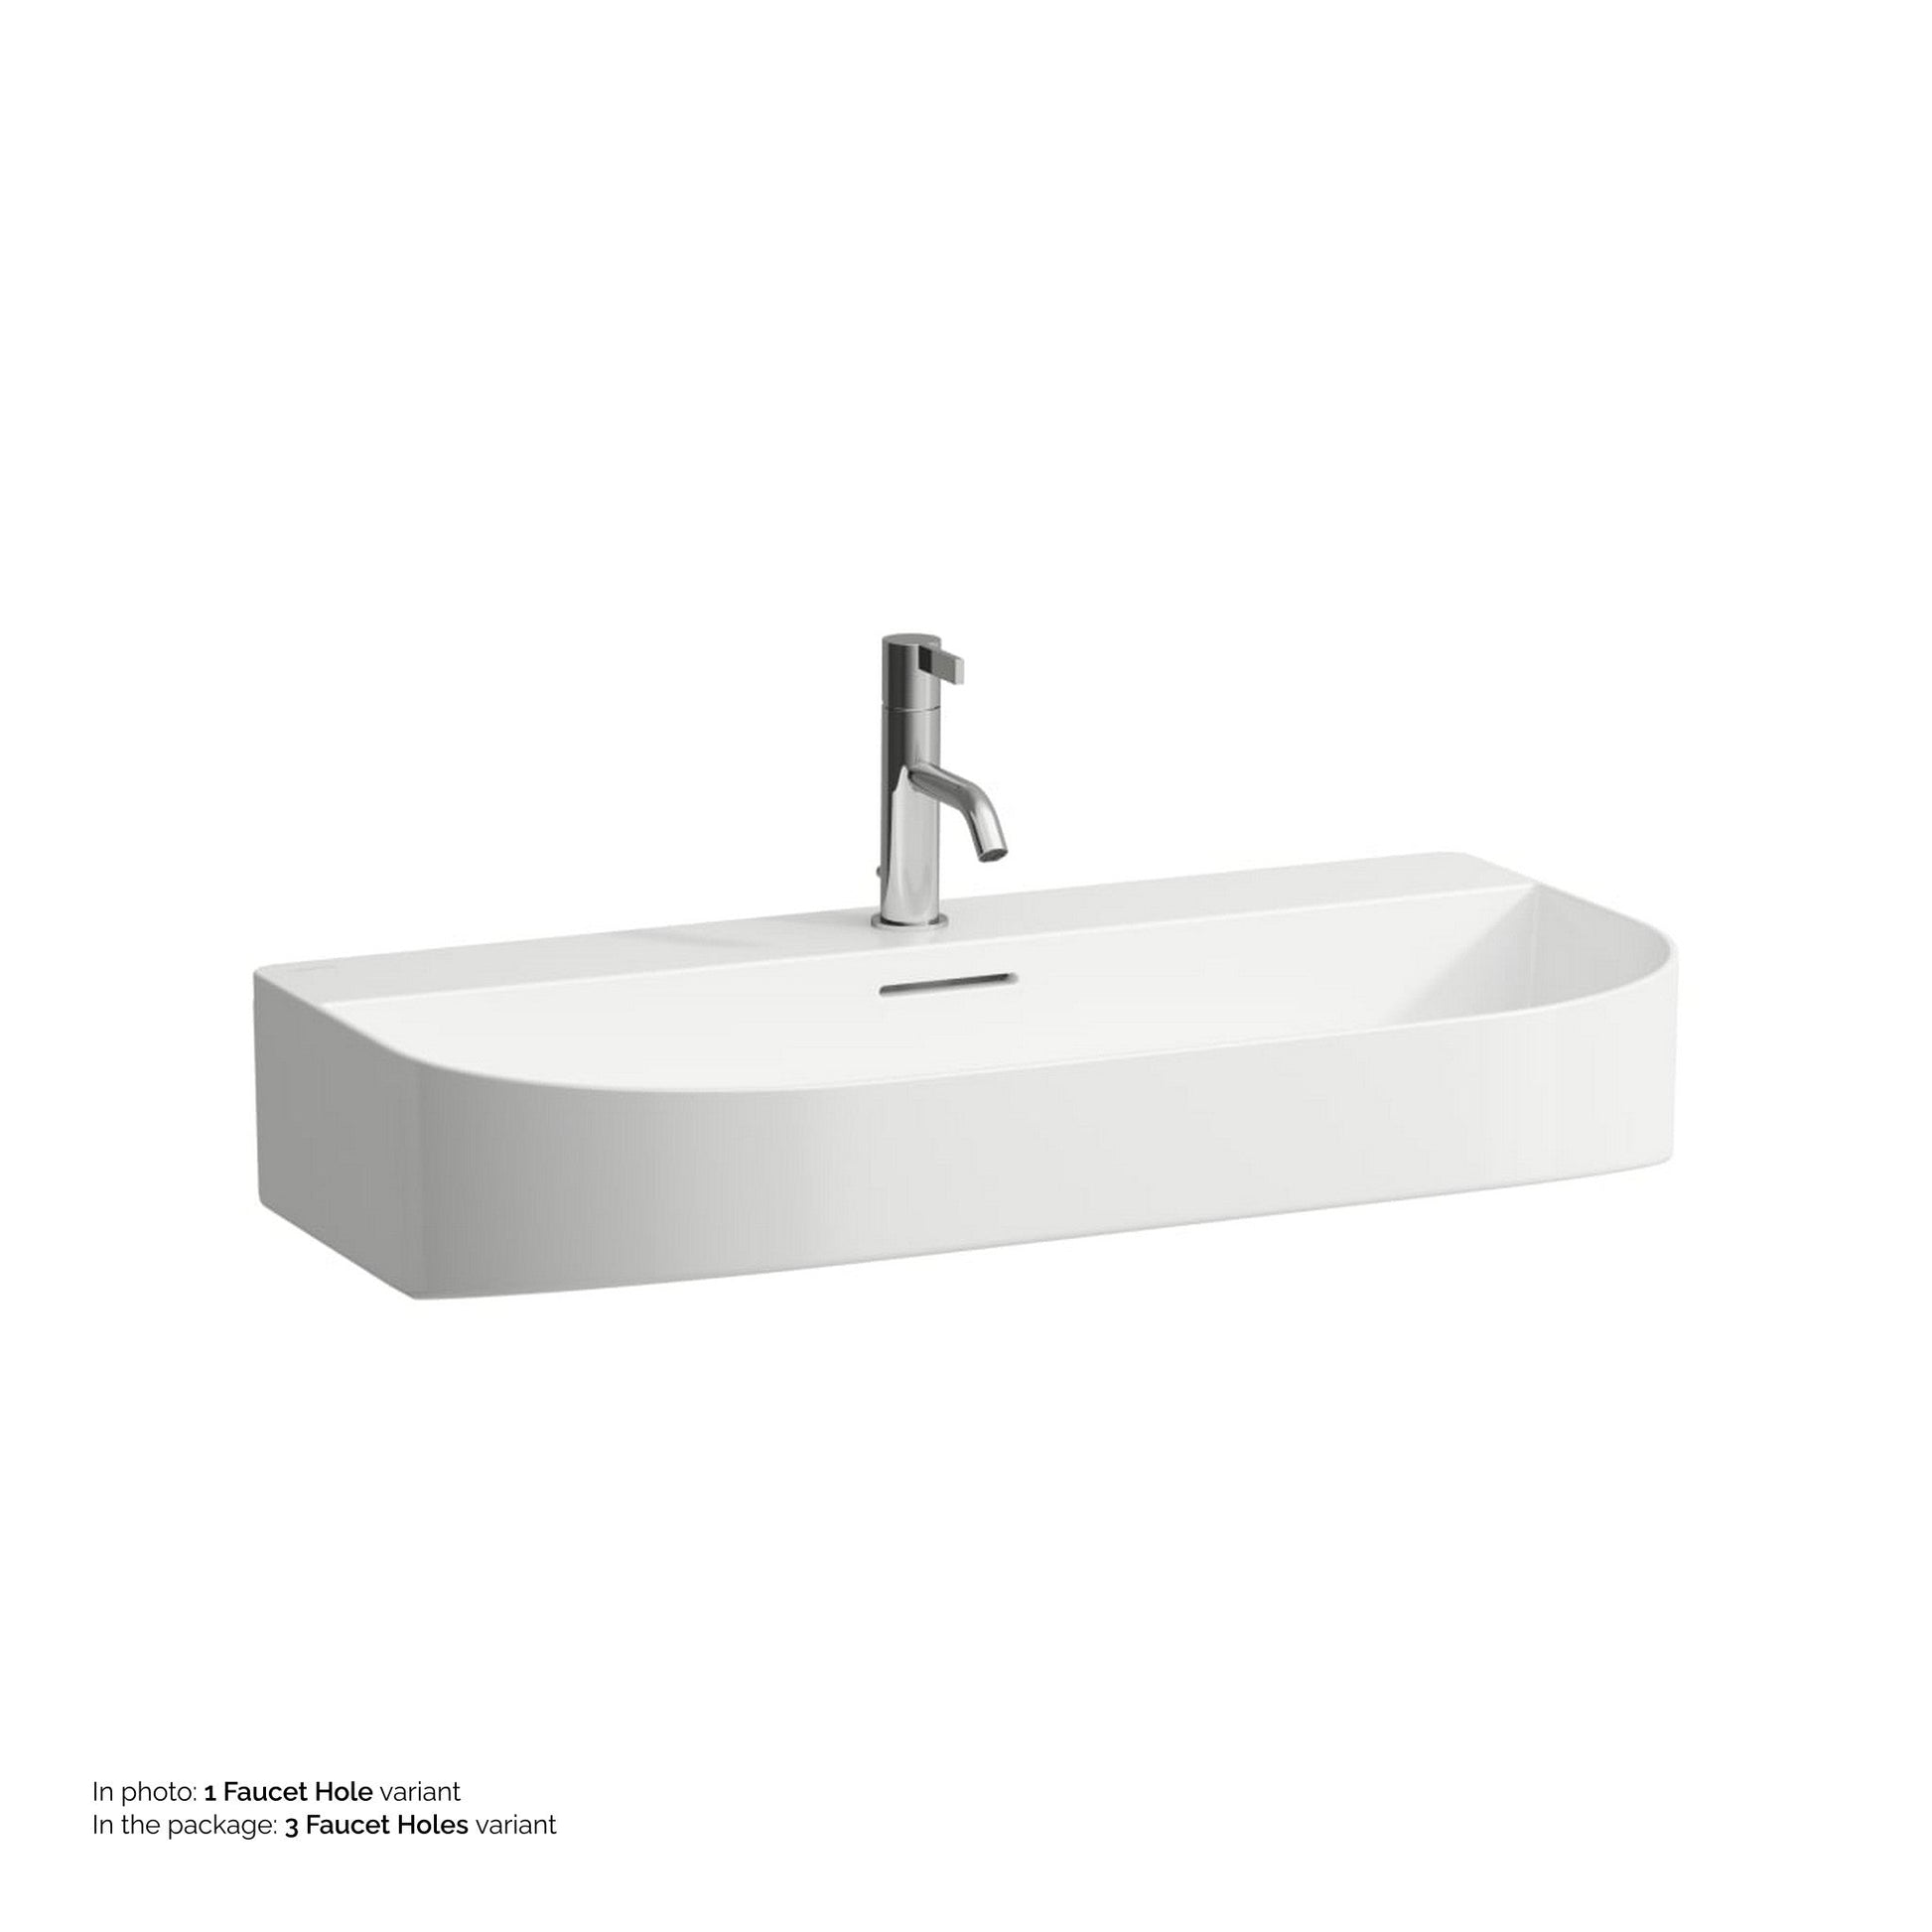 Laufen Sonar 32" White Ceramic Countertop Bathroom Sink With With Faucet Hole